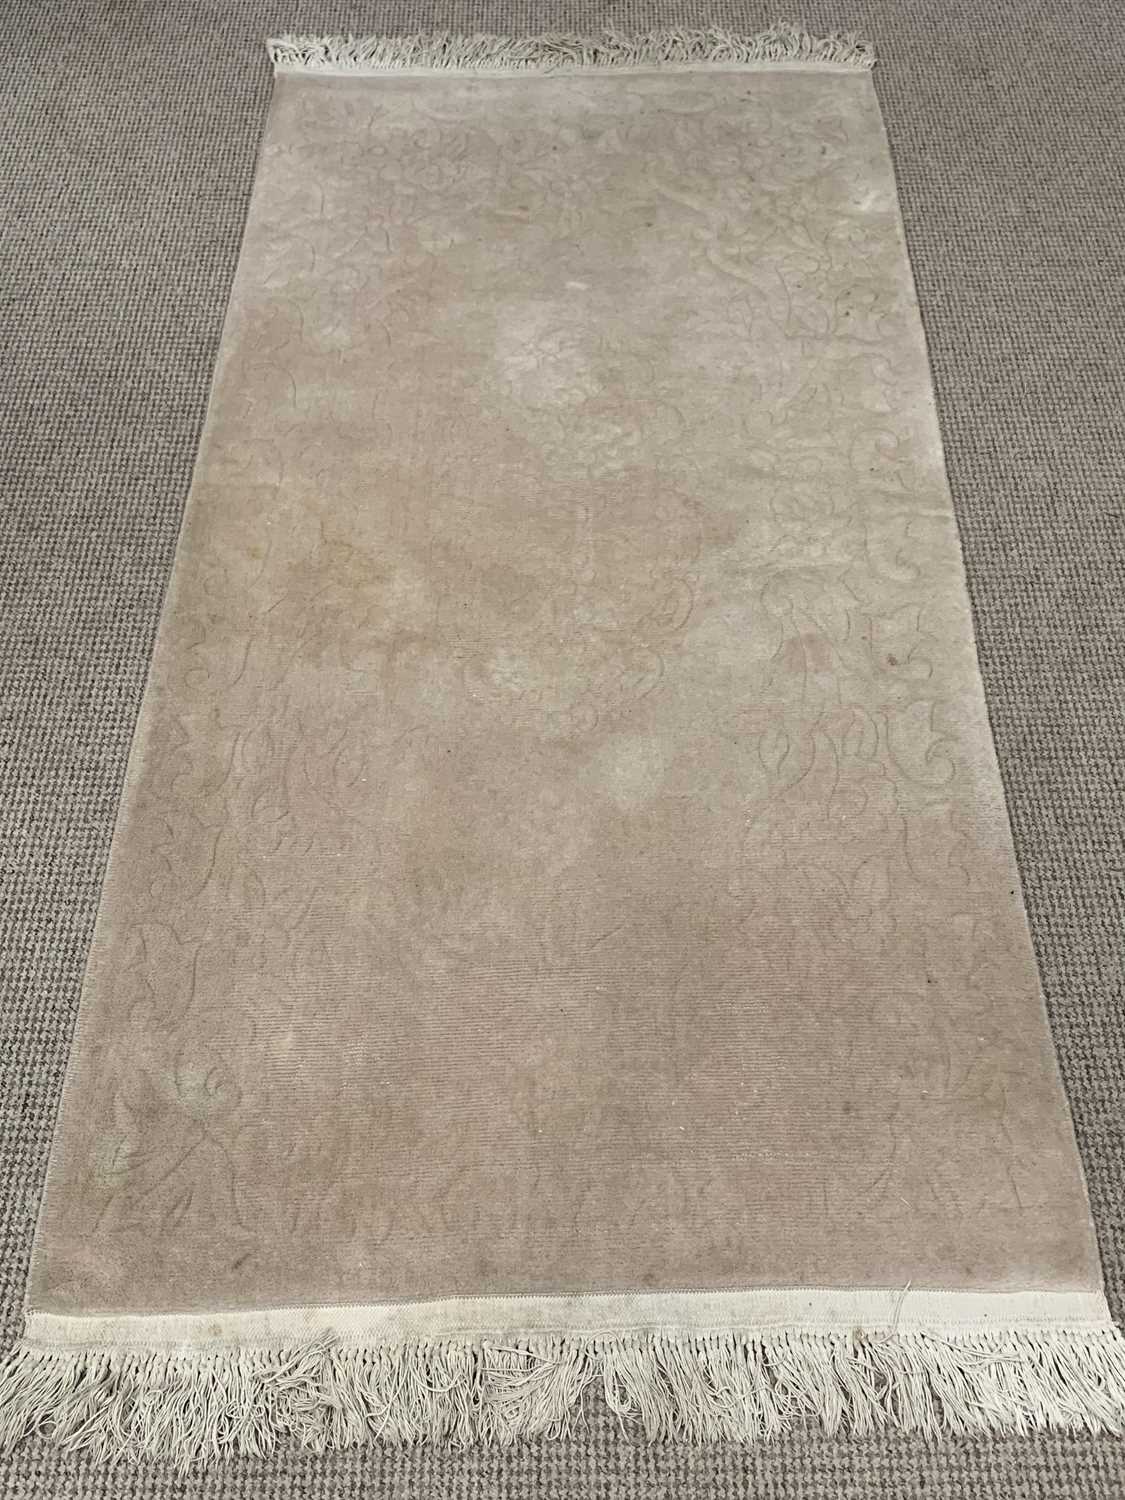 RUG - beige with floral pattern, label for "Imperial Jewel", 191cms L, 94cms W